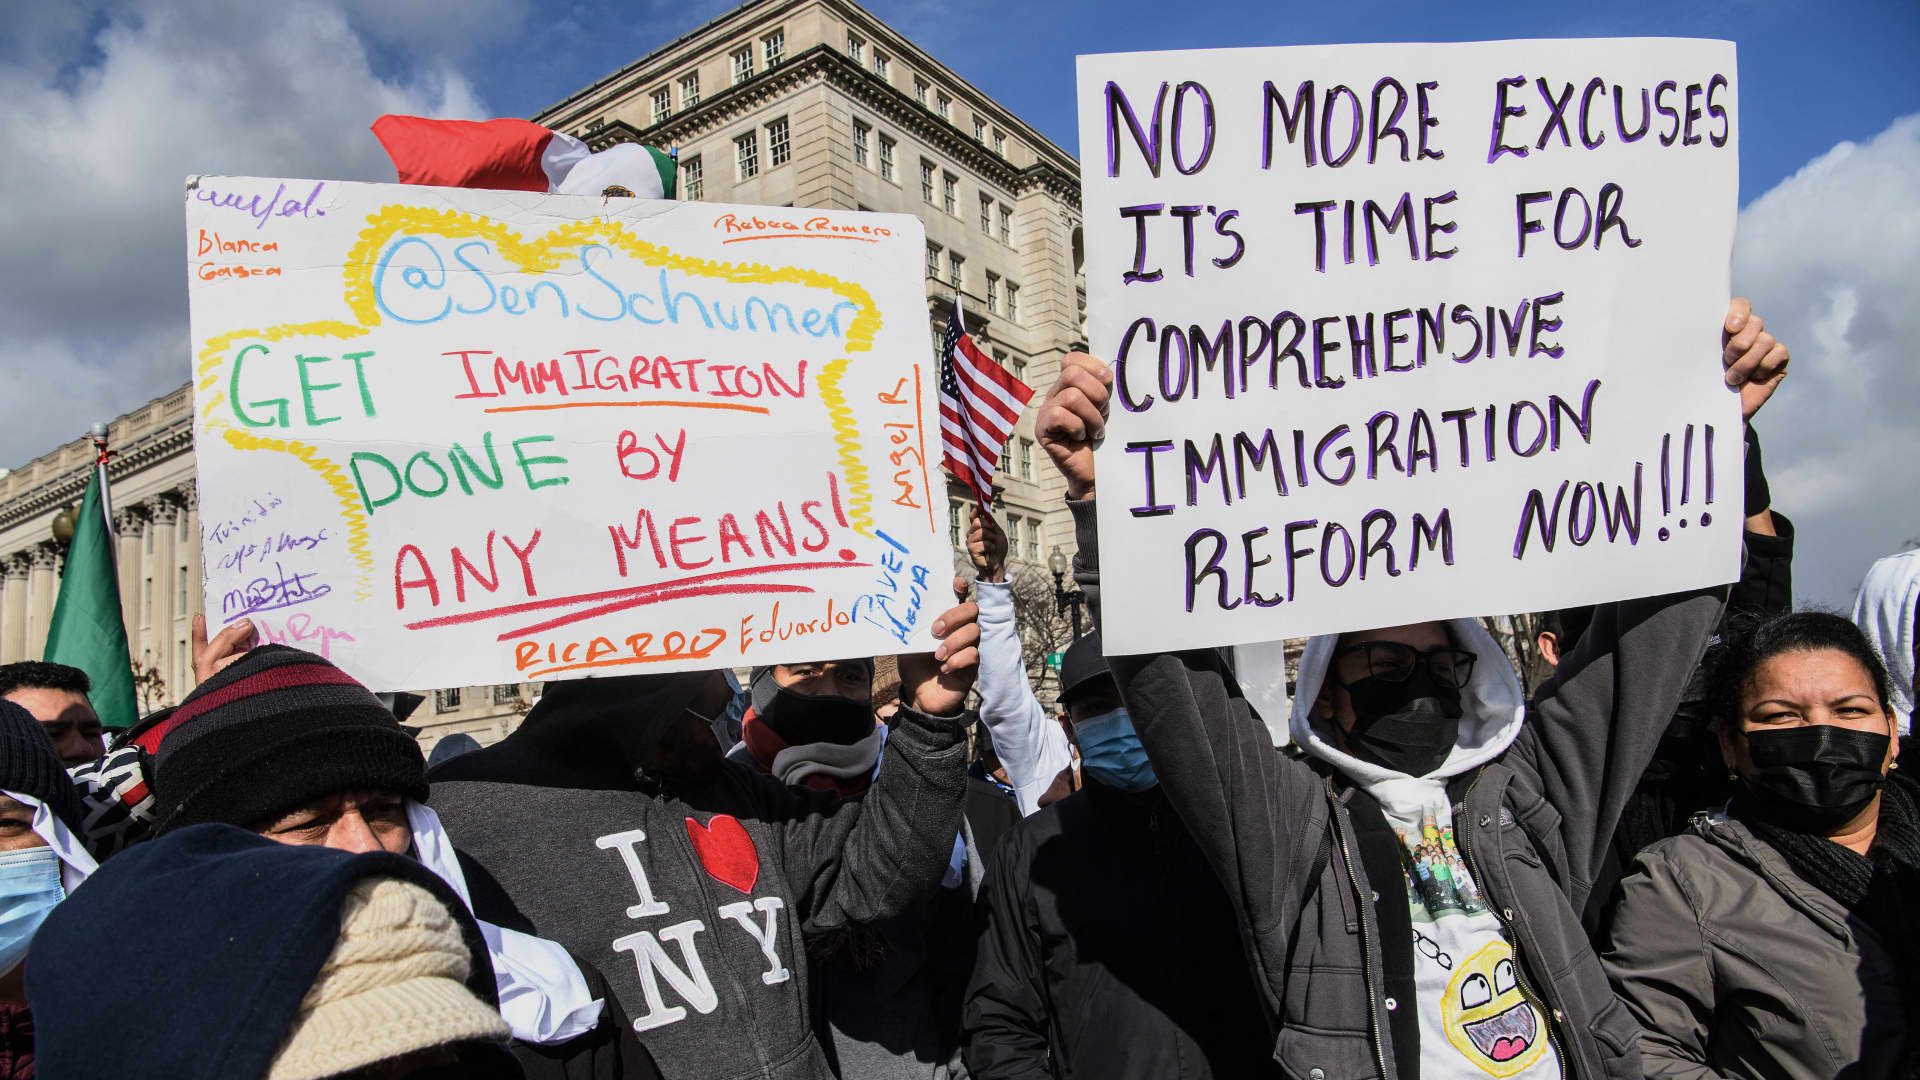 Immigration reform could be the answer to the falling U.S. birth rate